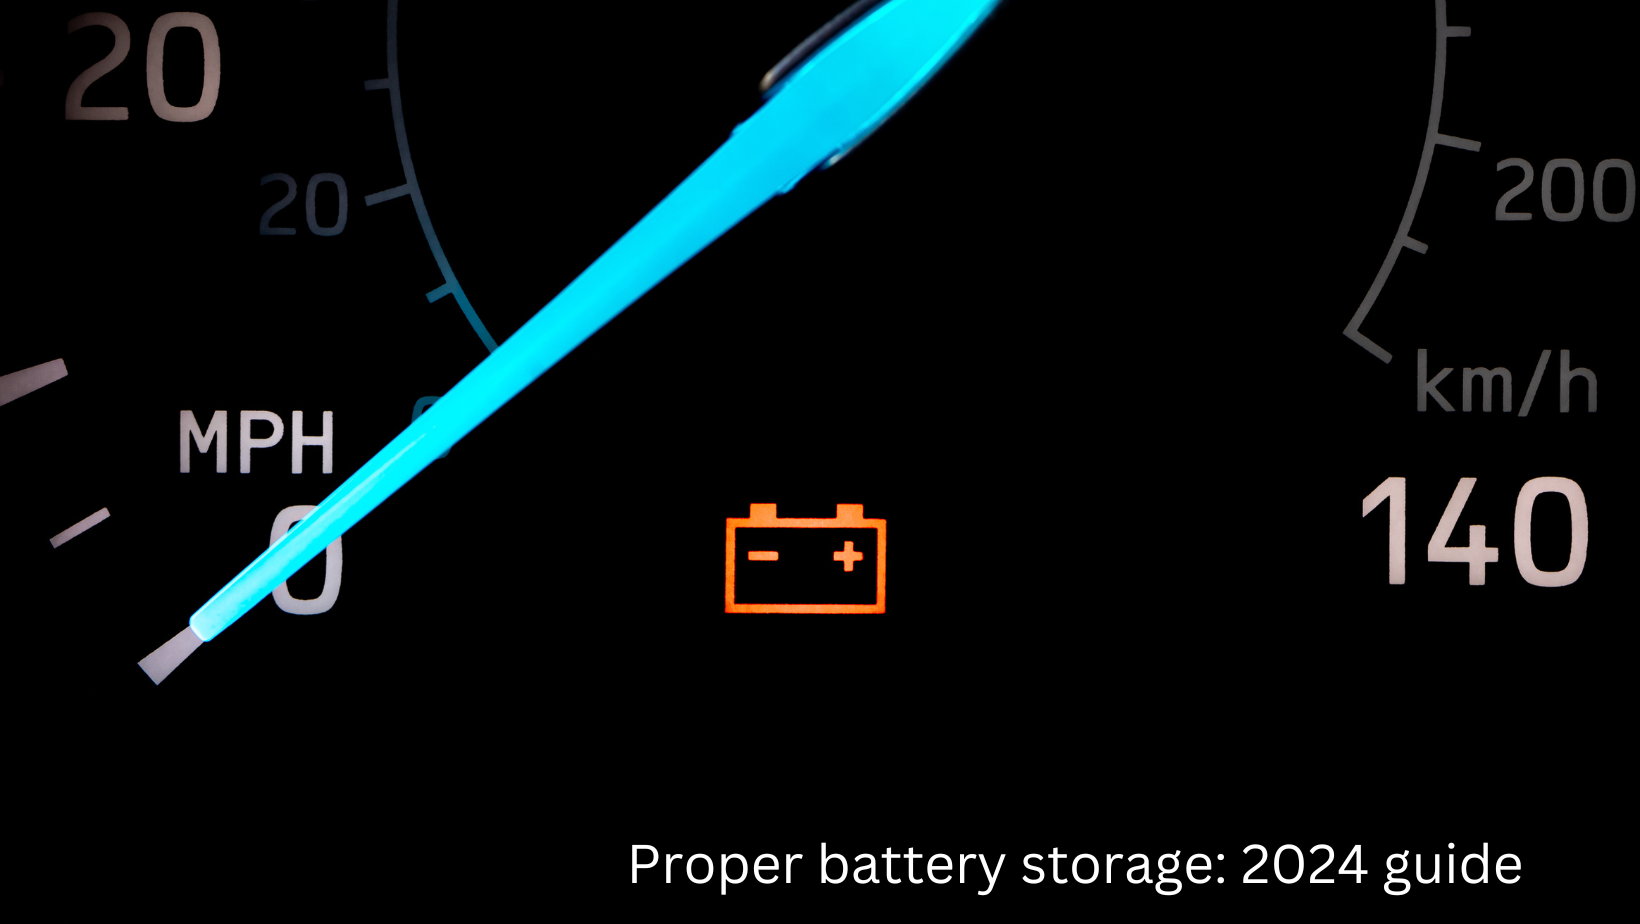 Proper battery storage with our guide